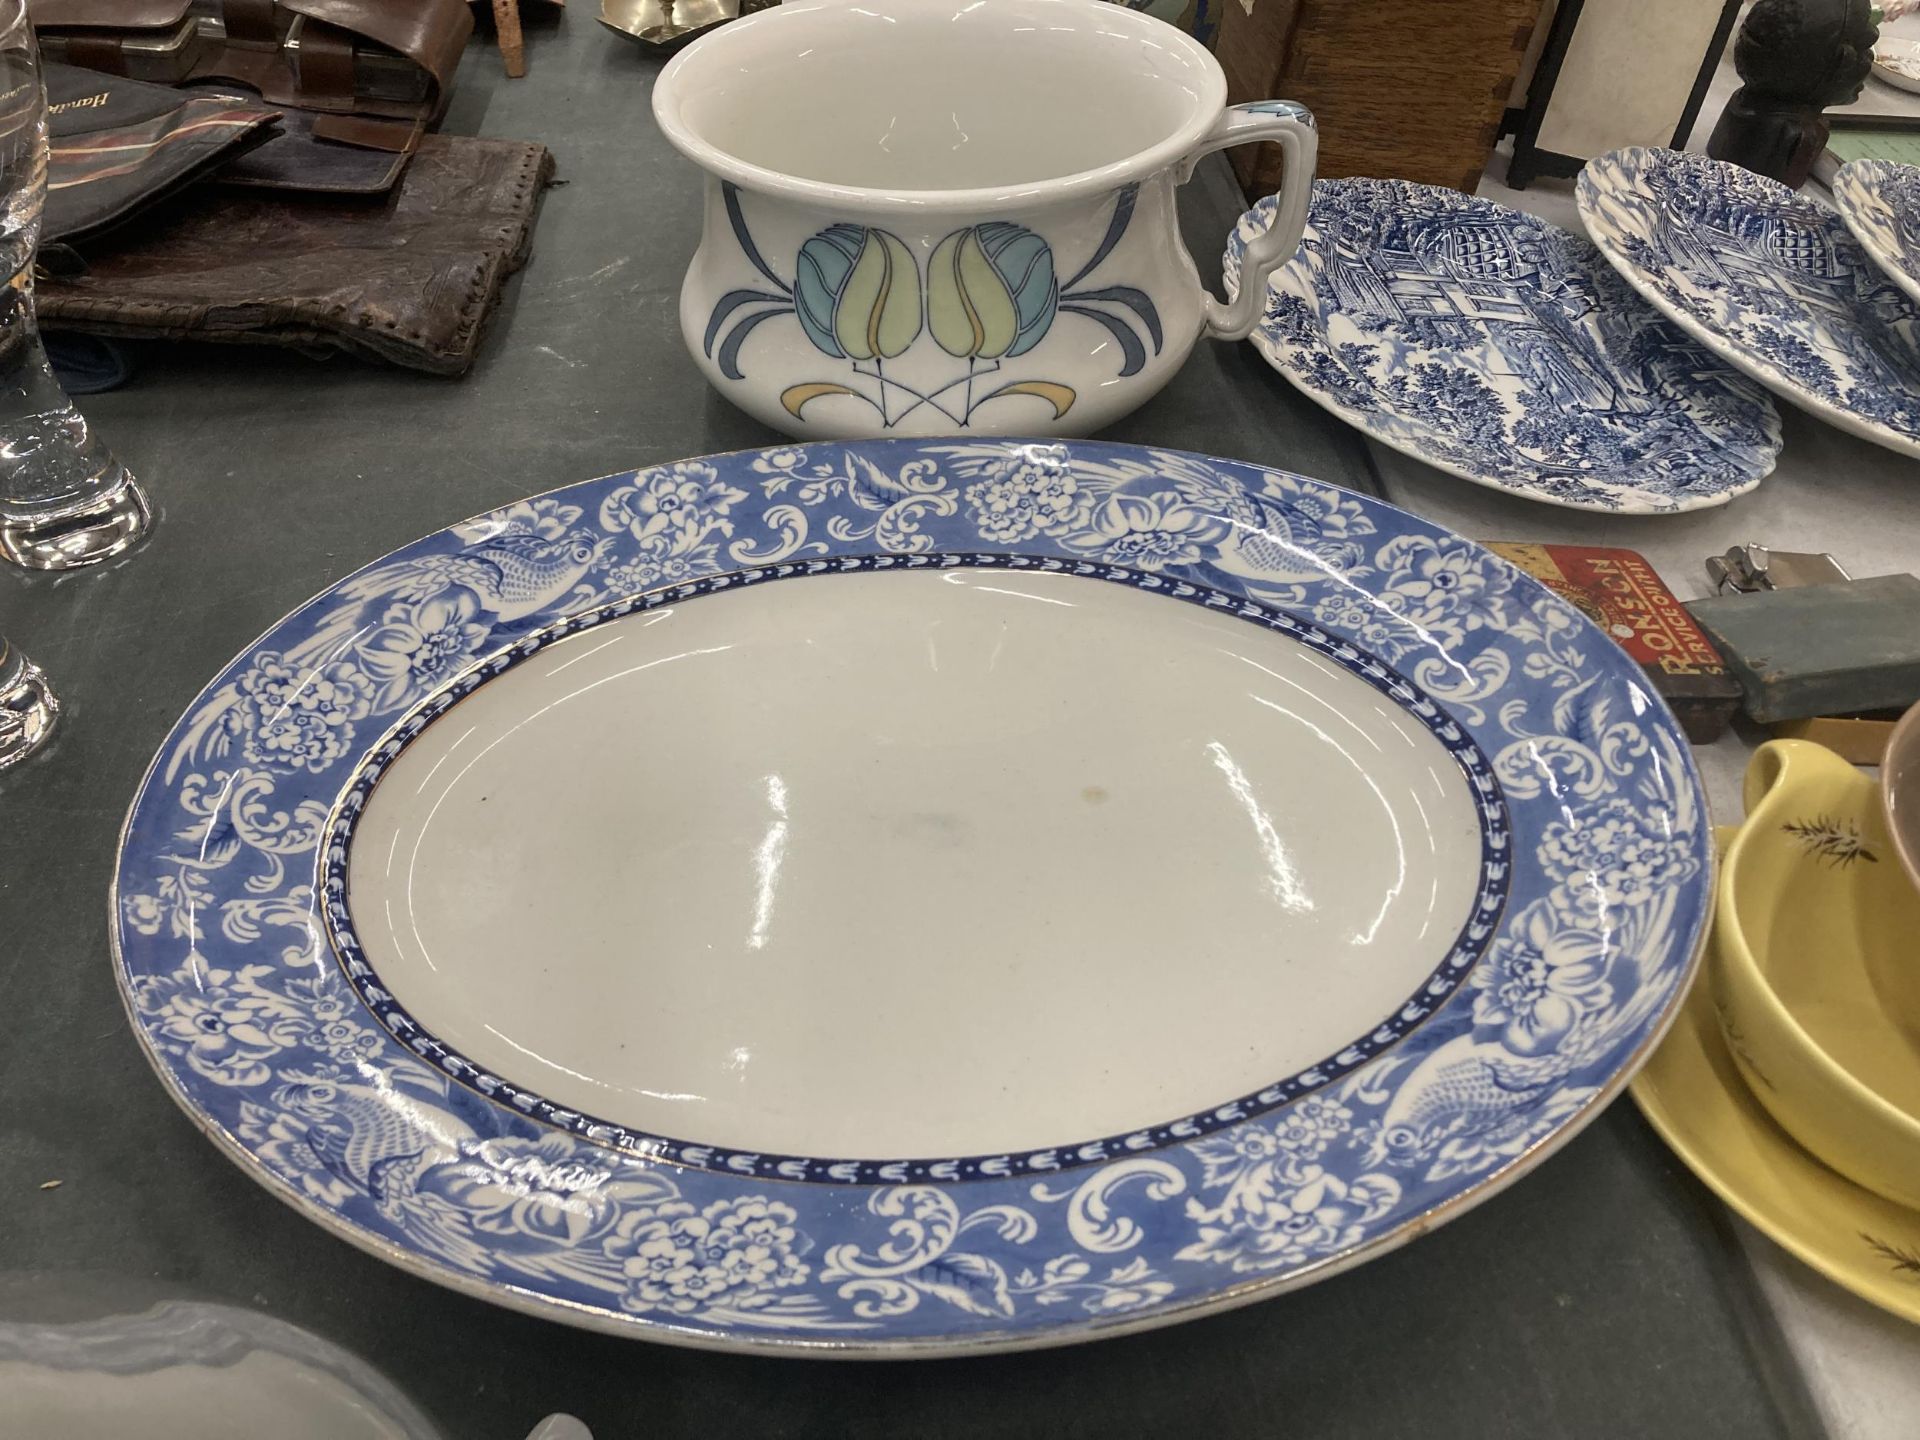 A LARGE DAVENPORT PLATTER AND AN ALFRED PEARCE CHAMBER POT WITH RETRO DESIGN